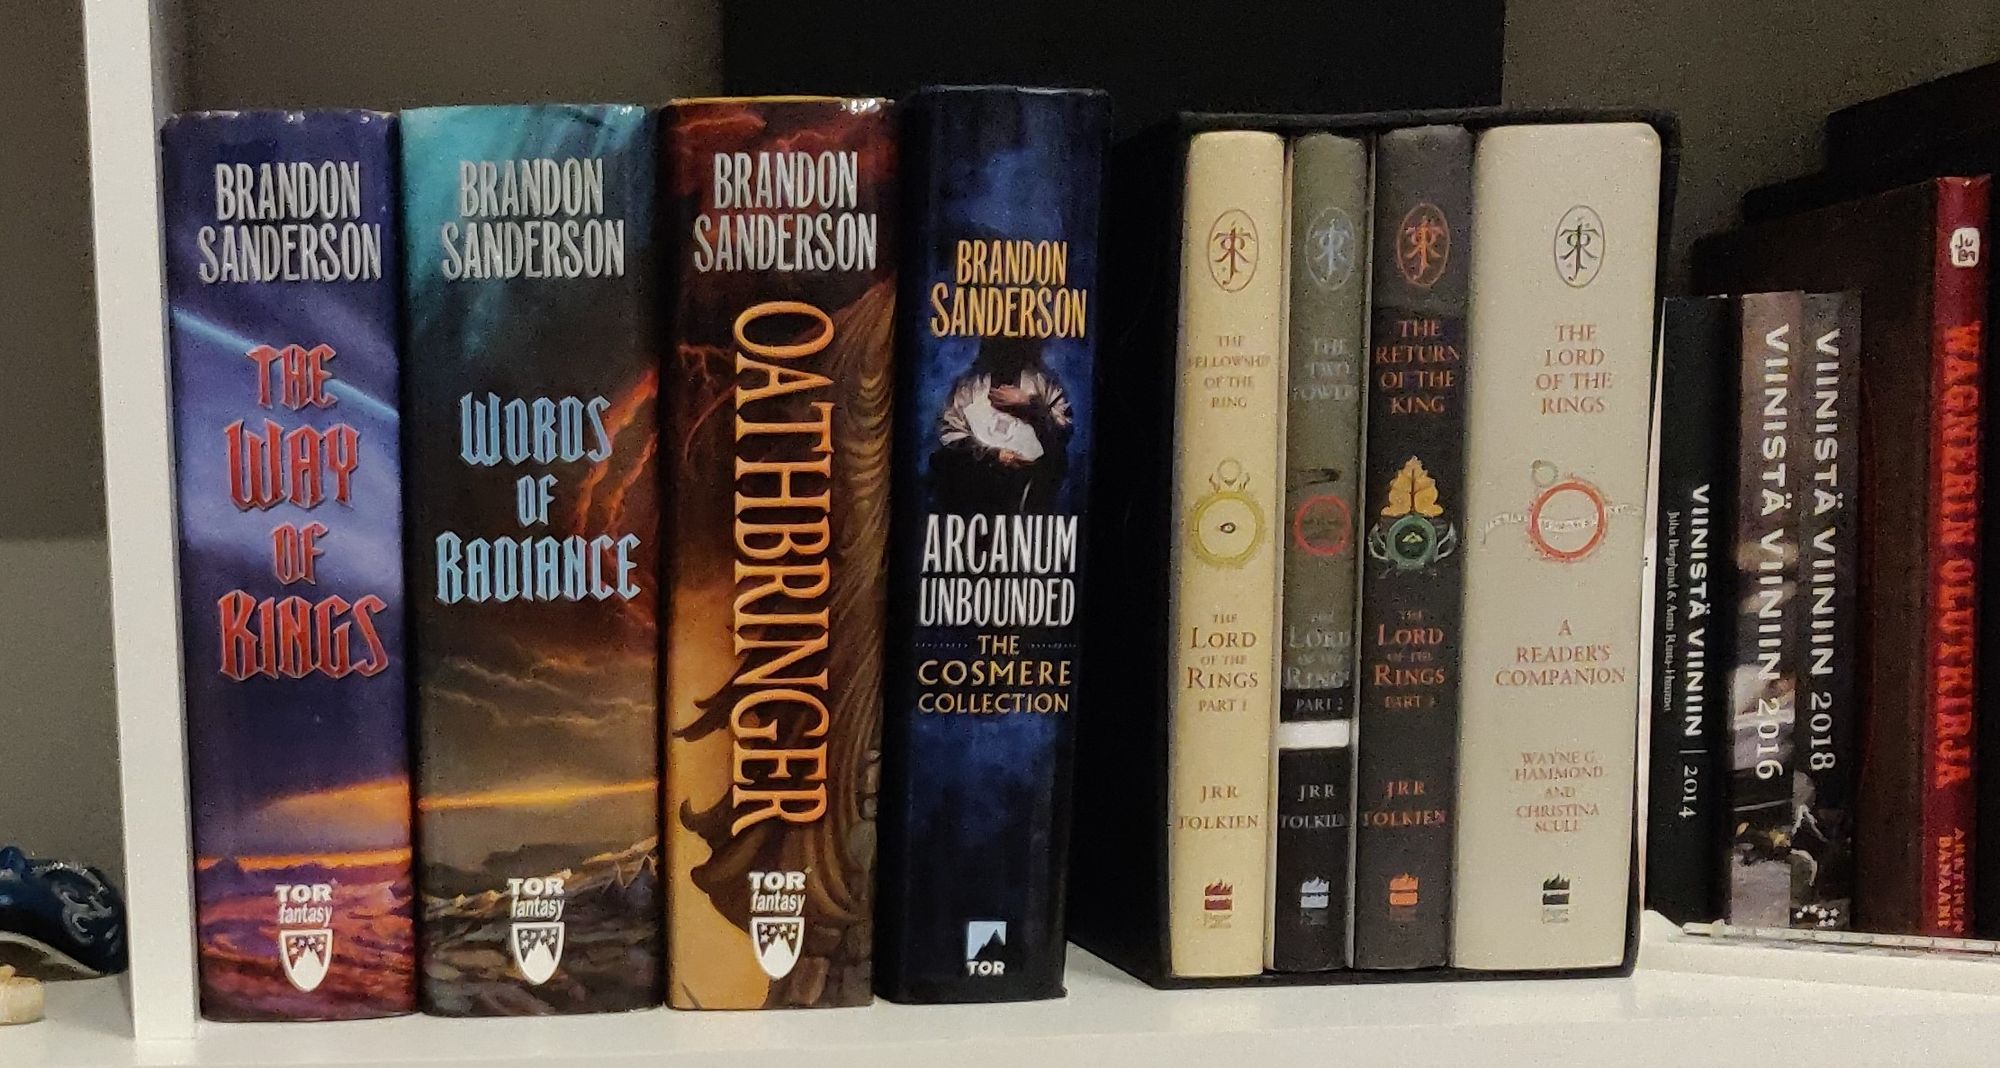 Arcanum Unbounded: The Cosmere Collection - Wikipedia